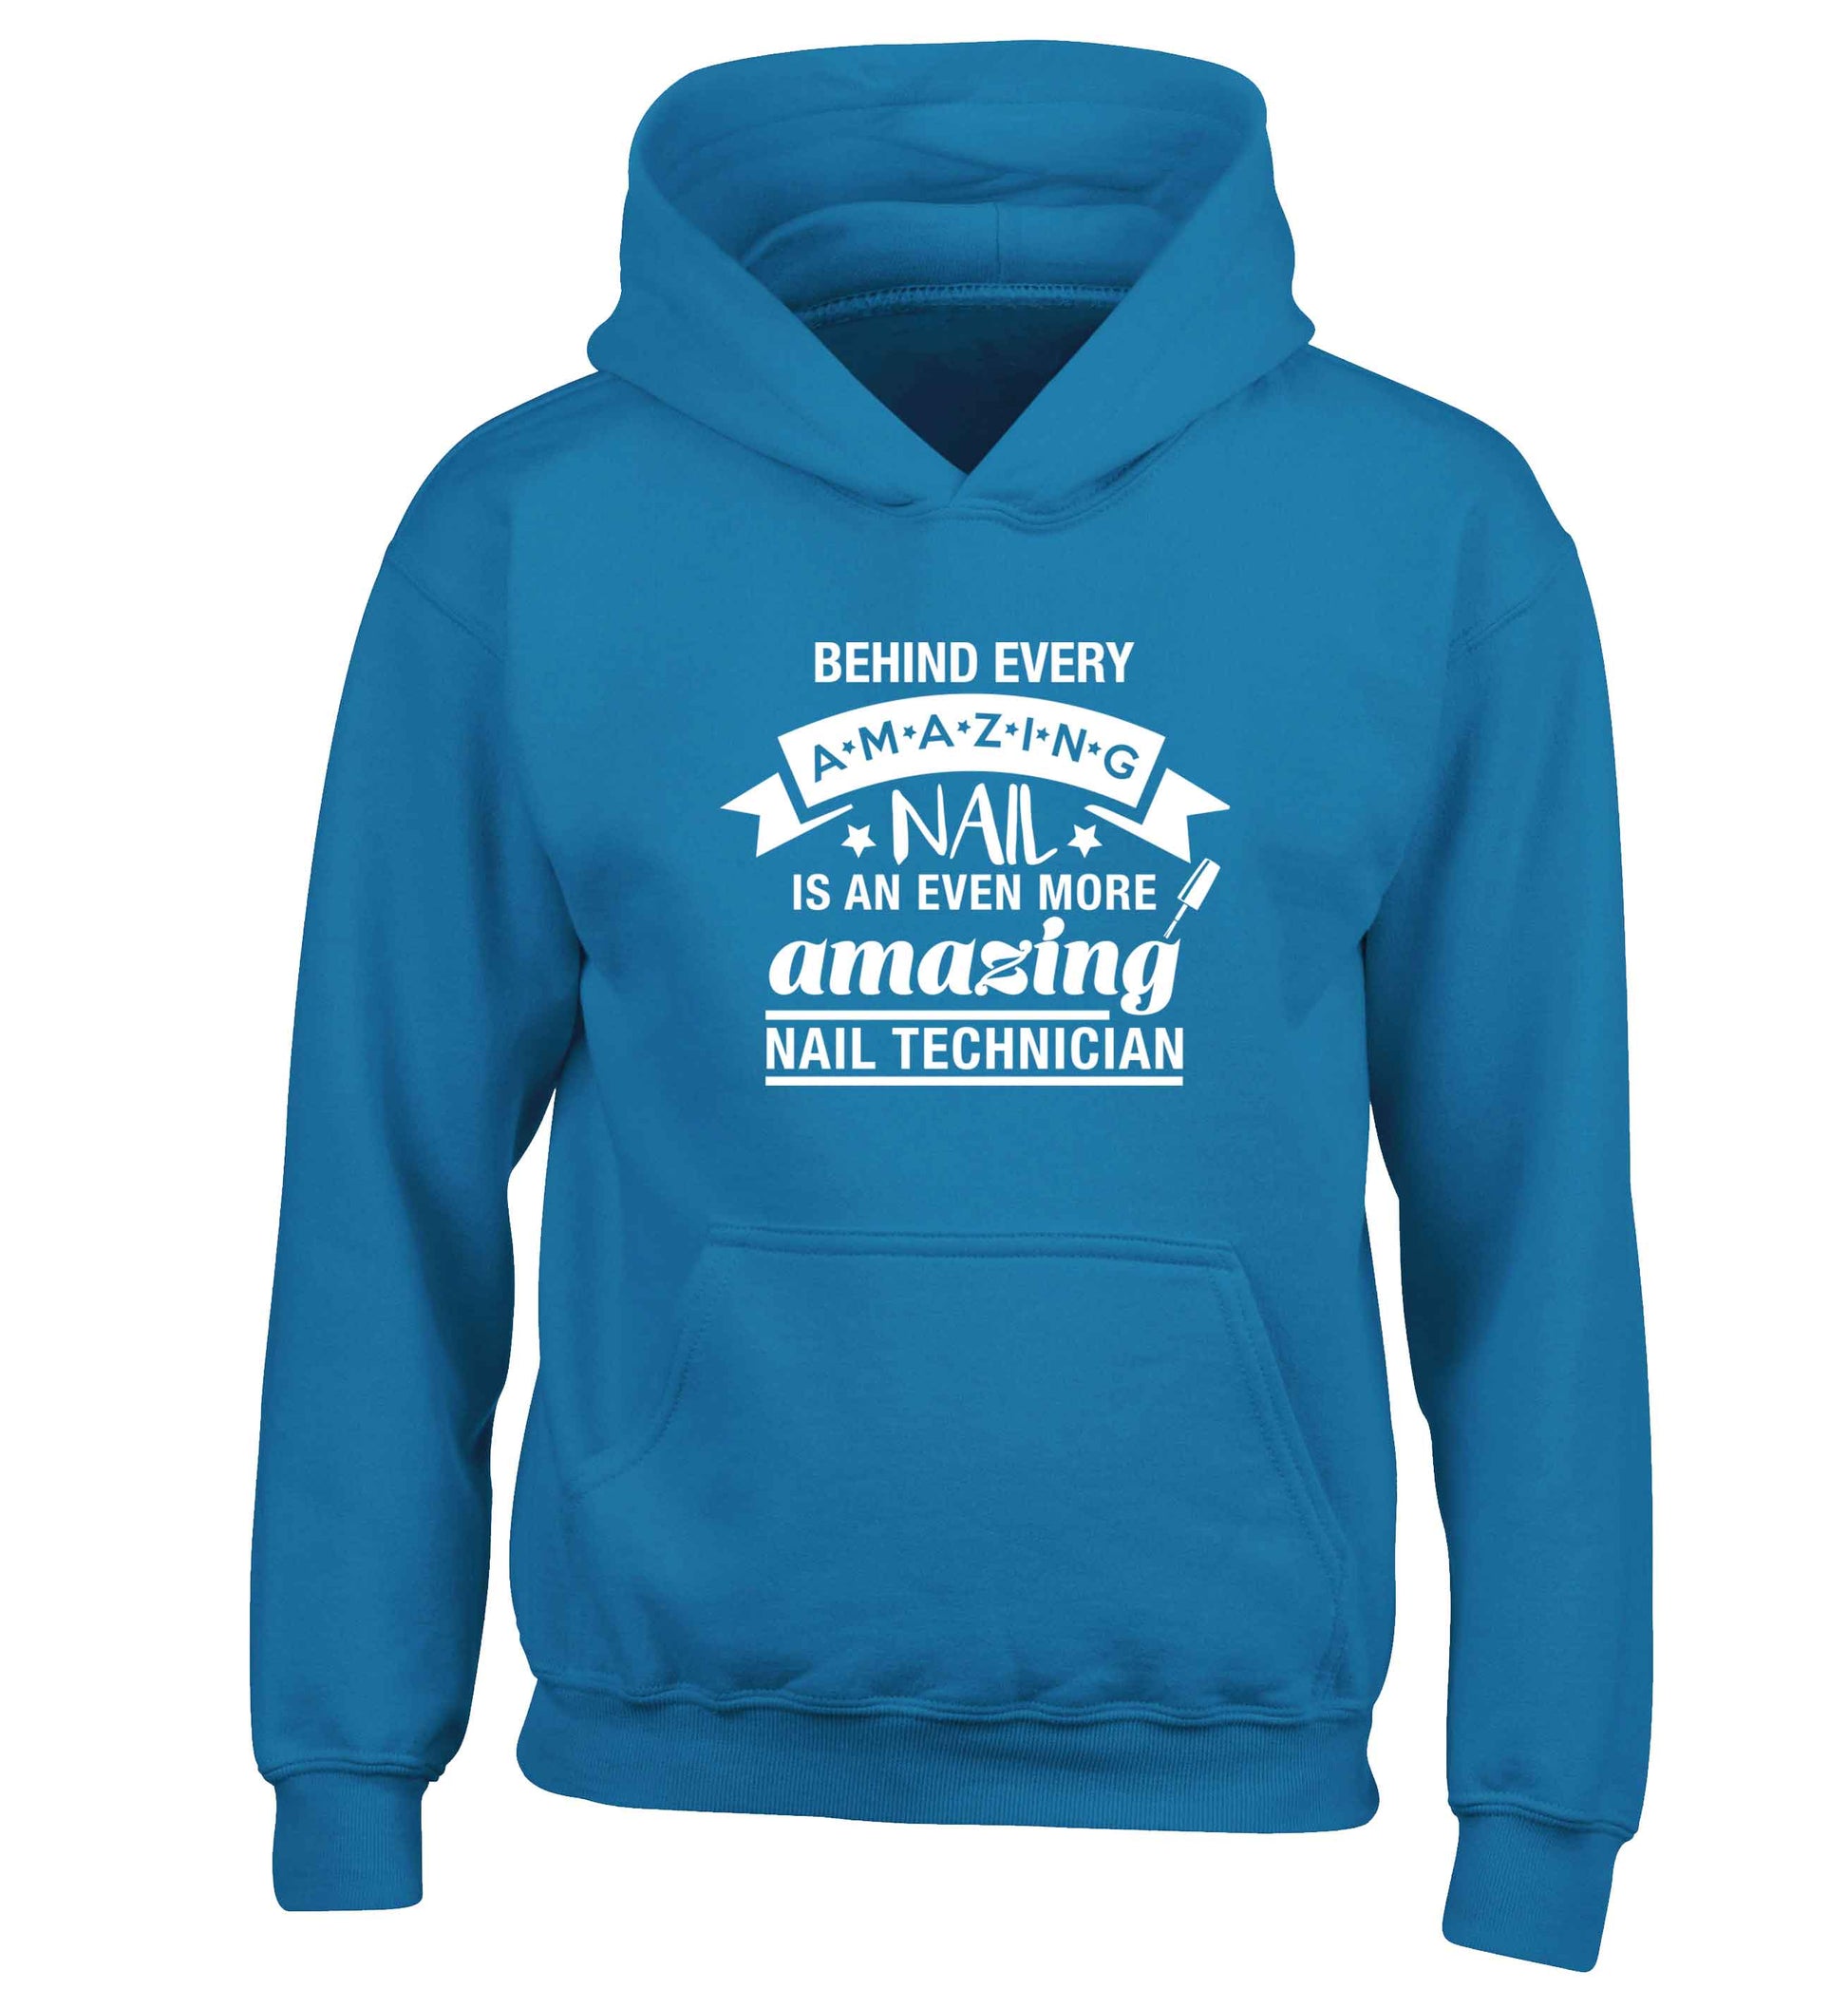 Behind every amazing nail is an even more amazing nail technician children's blue hoodie 12-13 Years